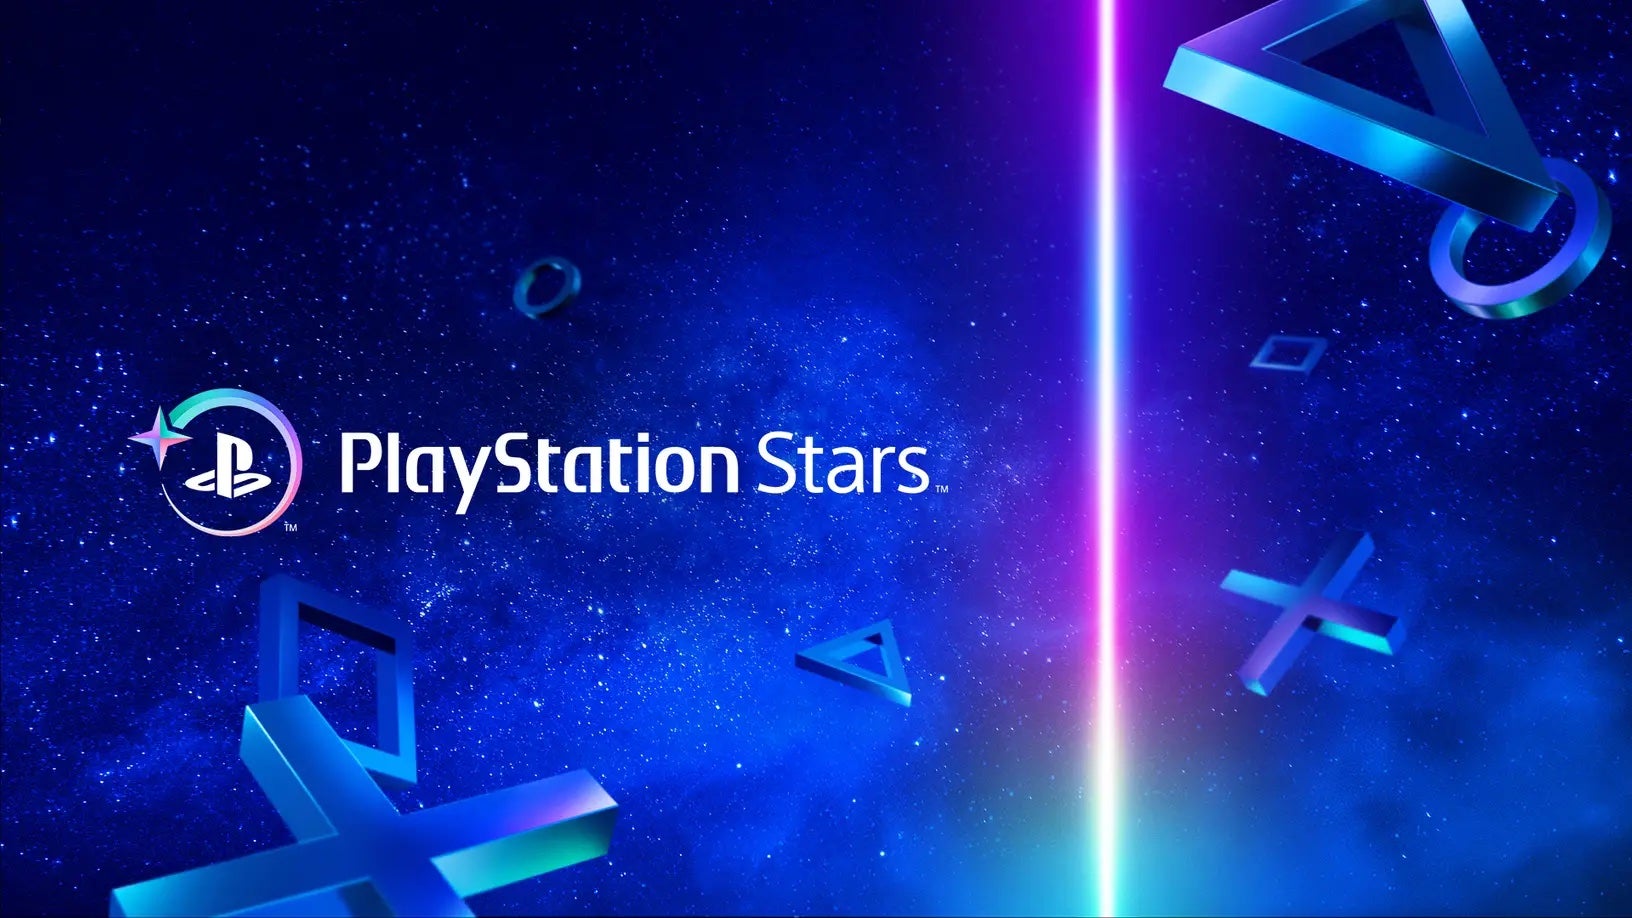 Image for PlayStation Stars live in US, but has "random" two-month waitlist for some